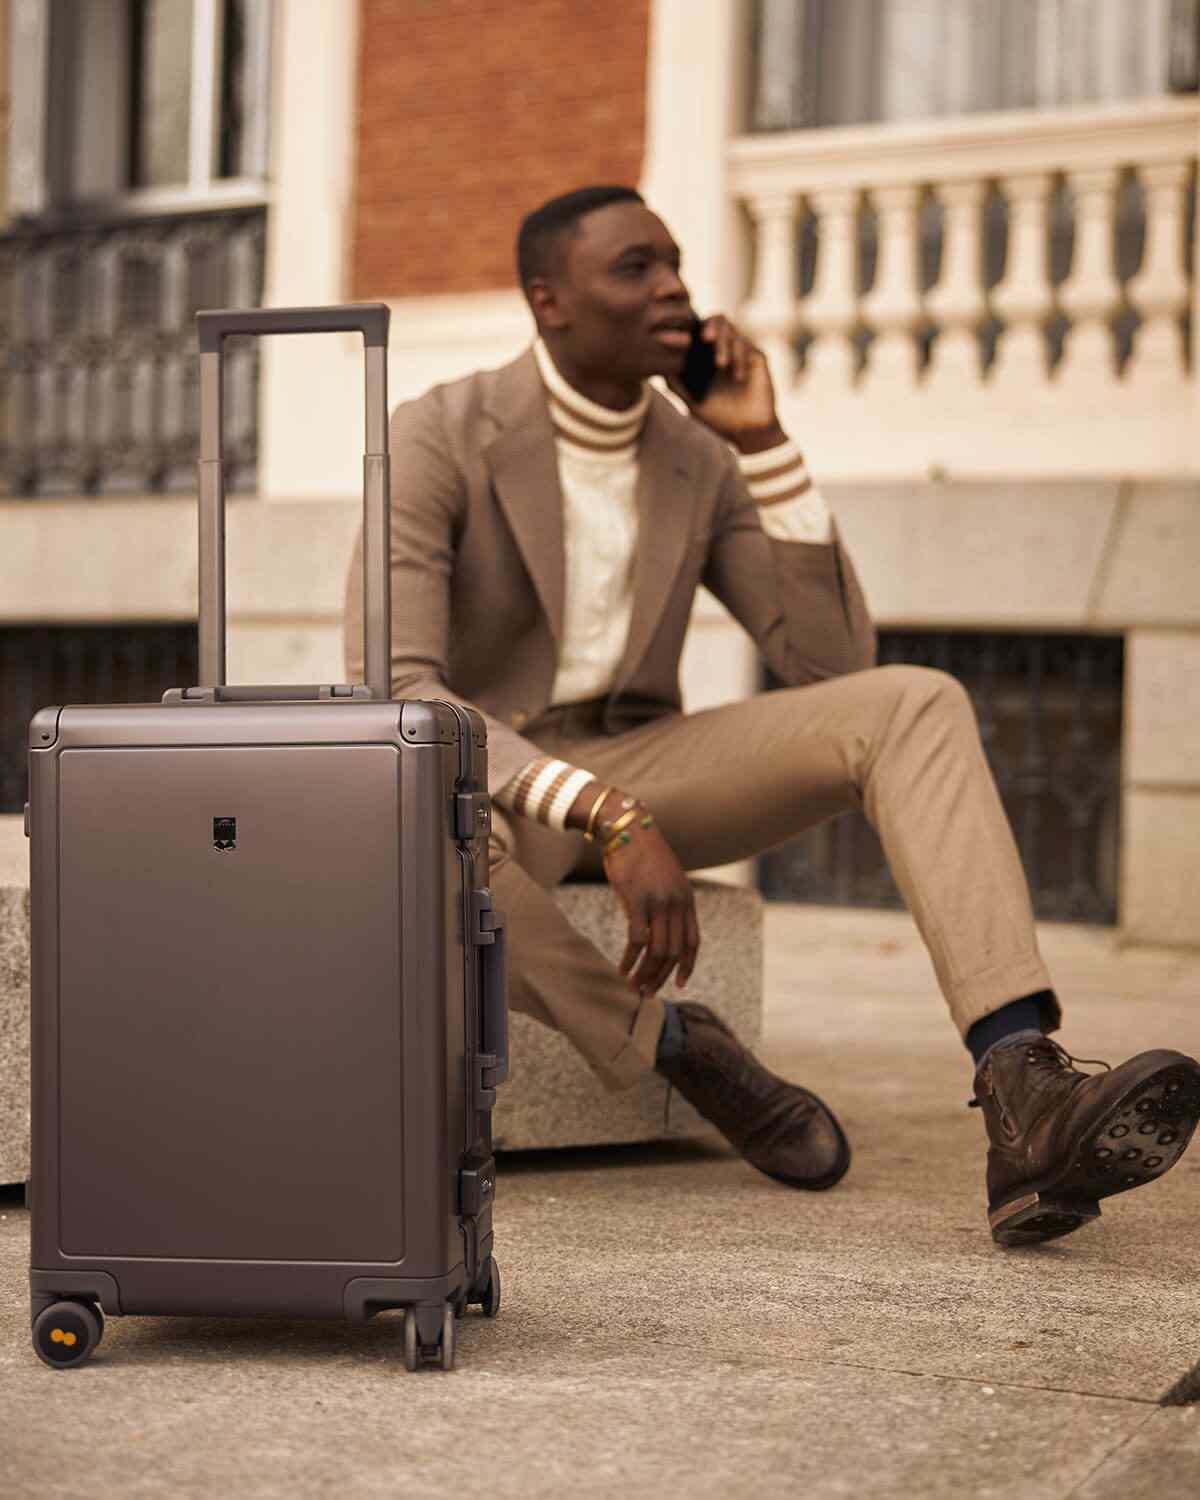 First-Hand Review and Experience with the Level8 Atlas Aluminium Luggage!